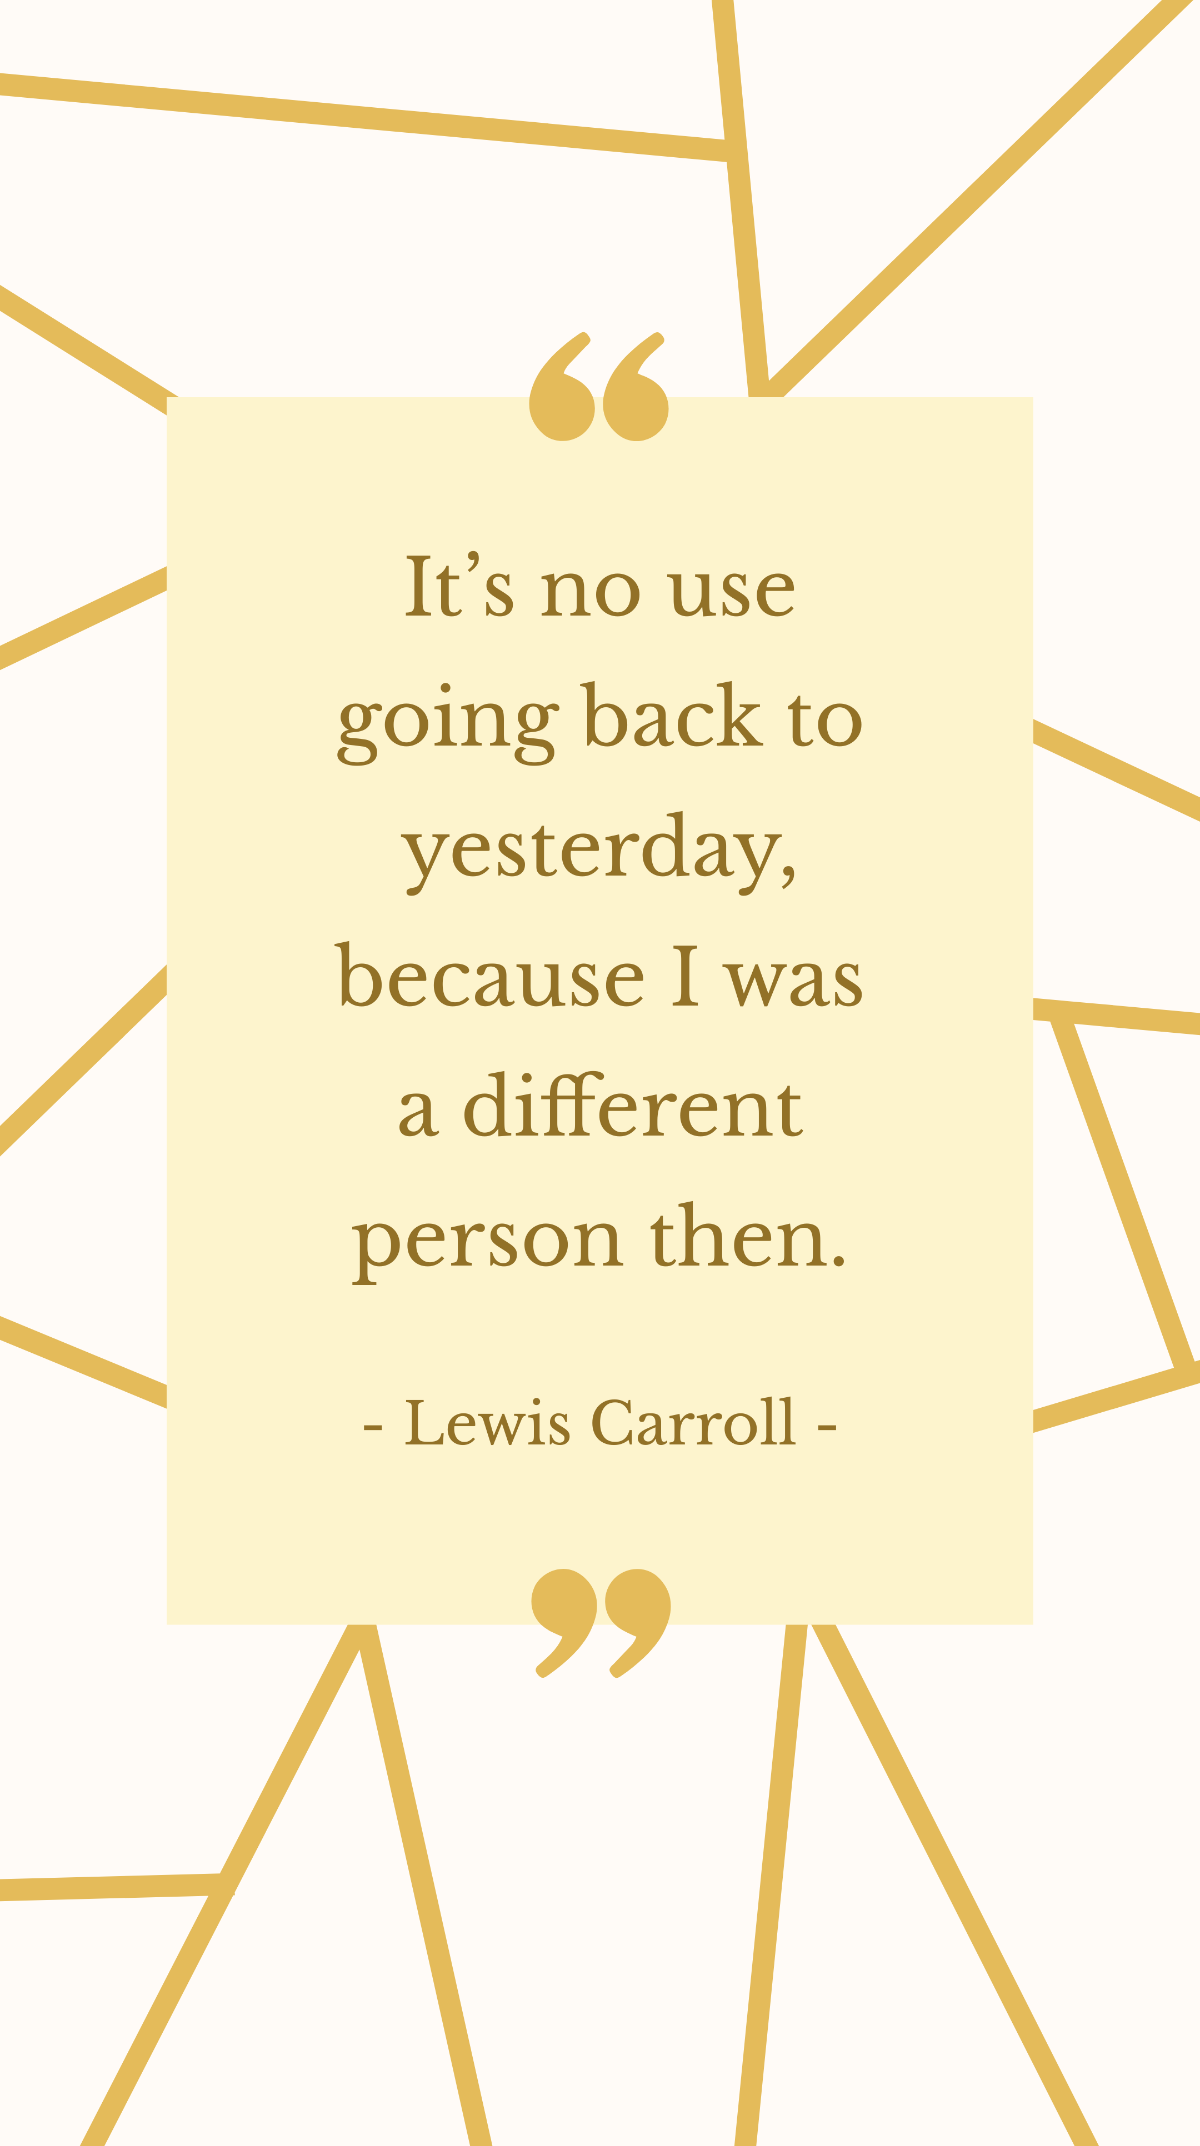 Lewis Carroll - It’s no use going back to yesterday, because I was a different person then. Template